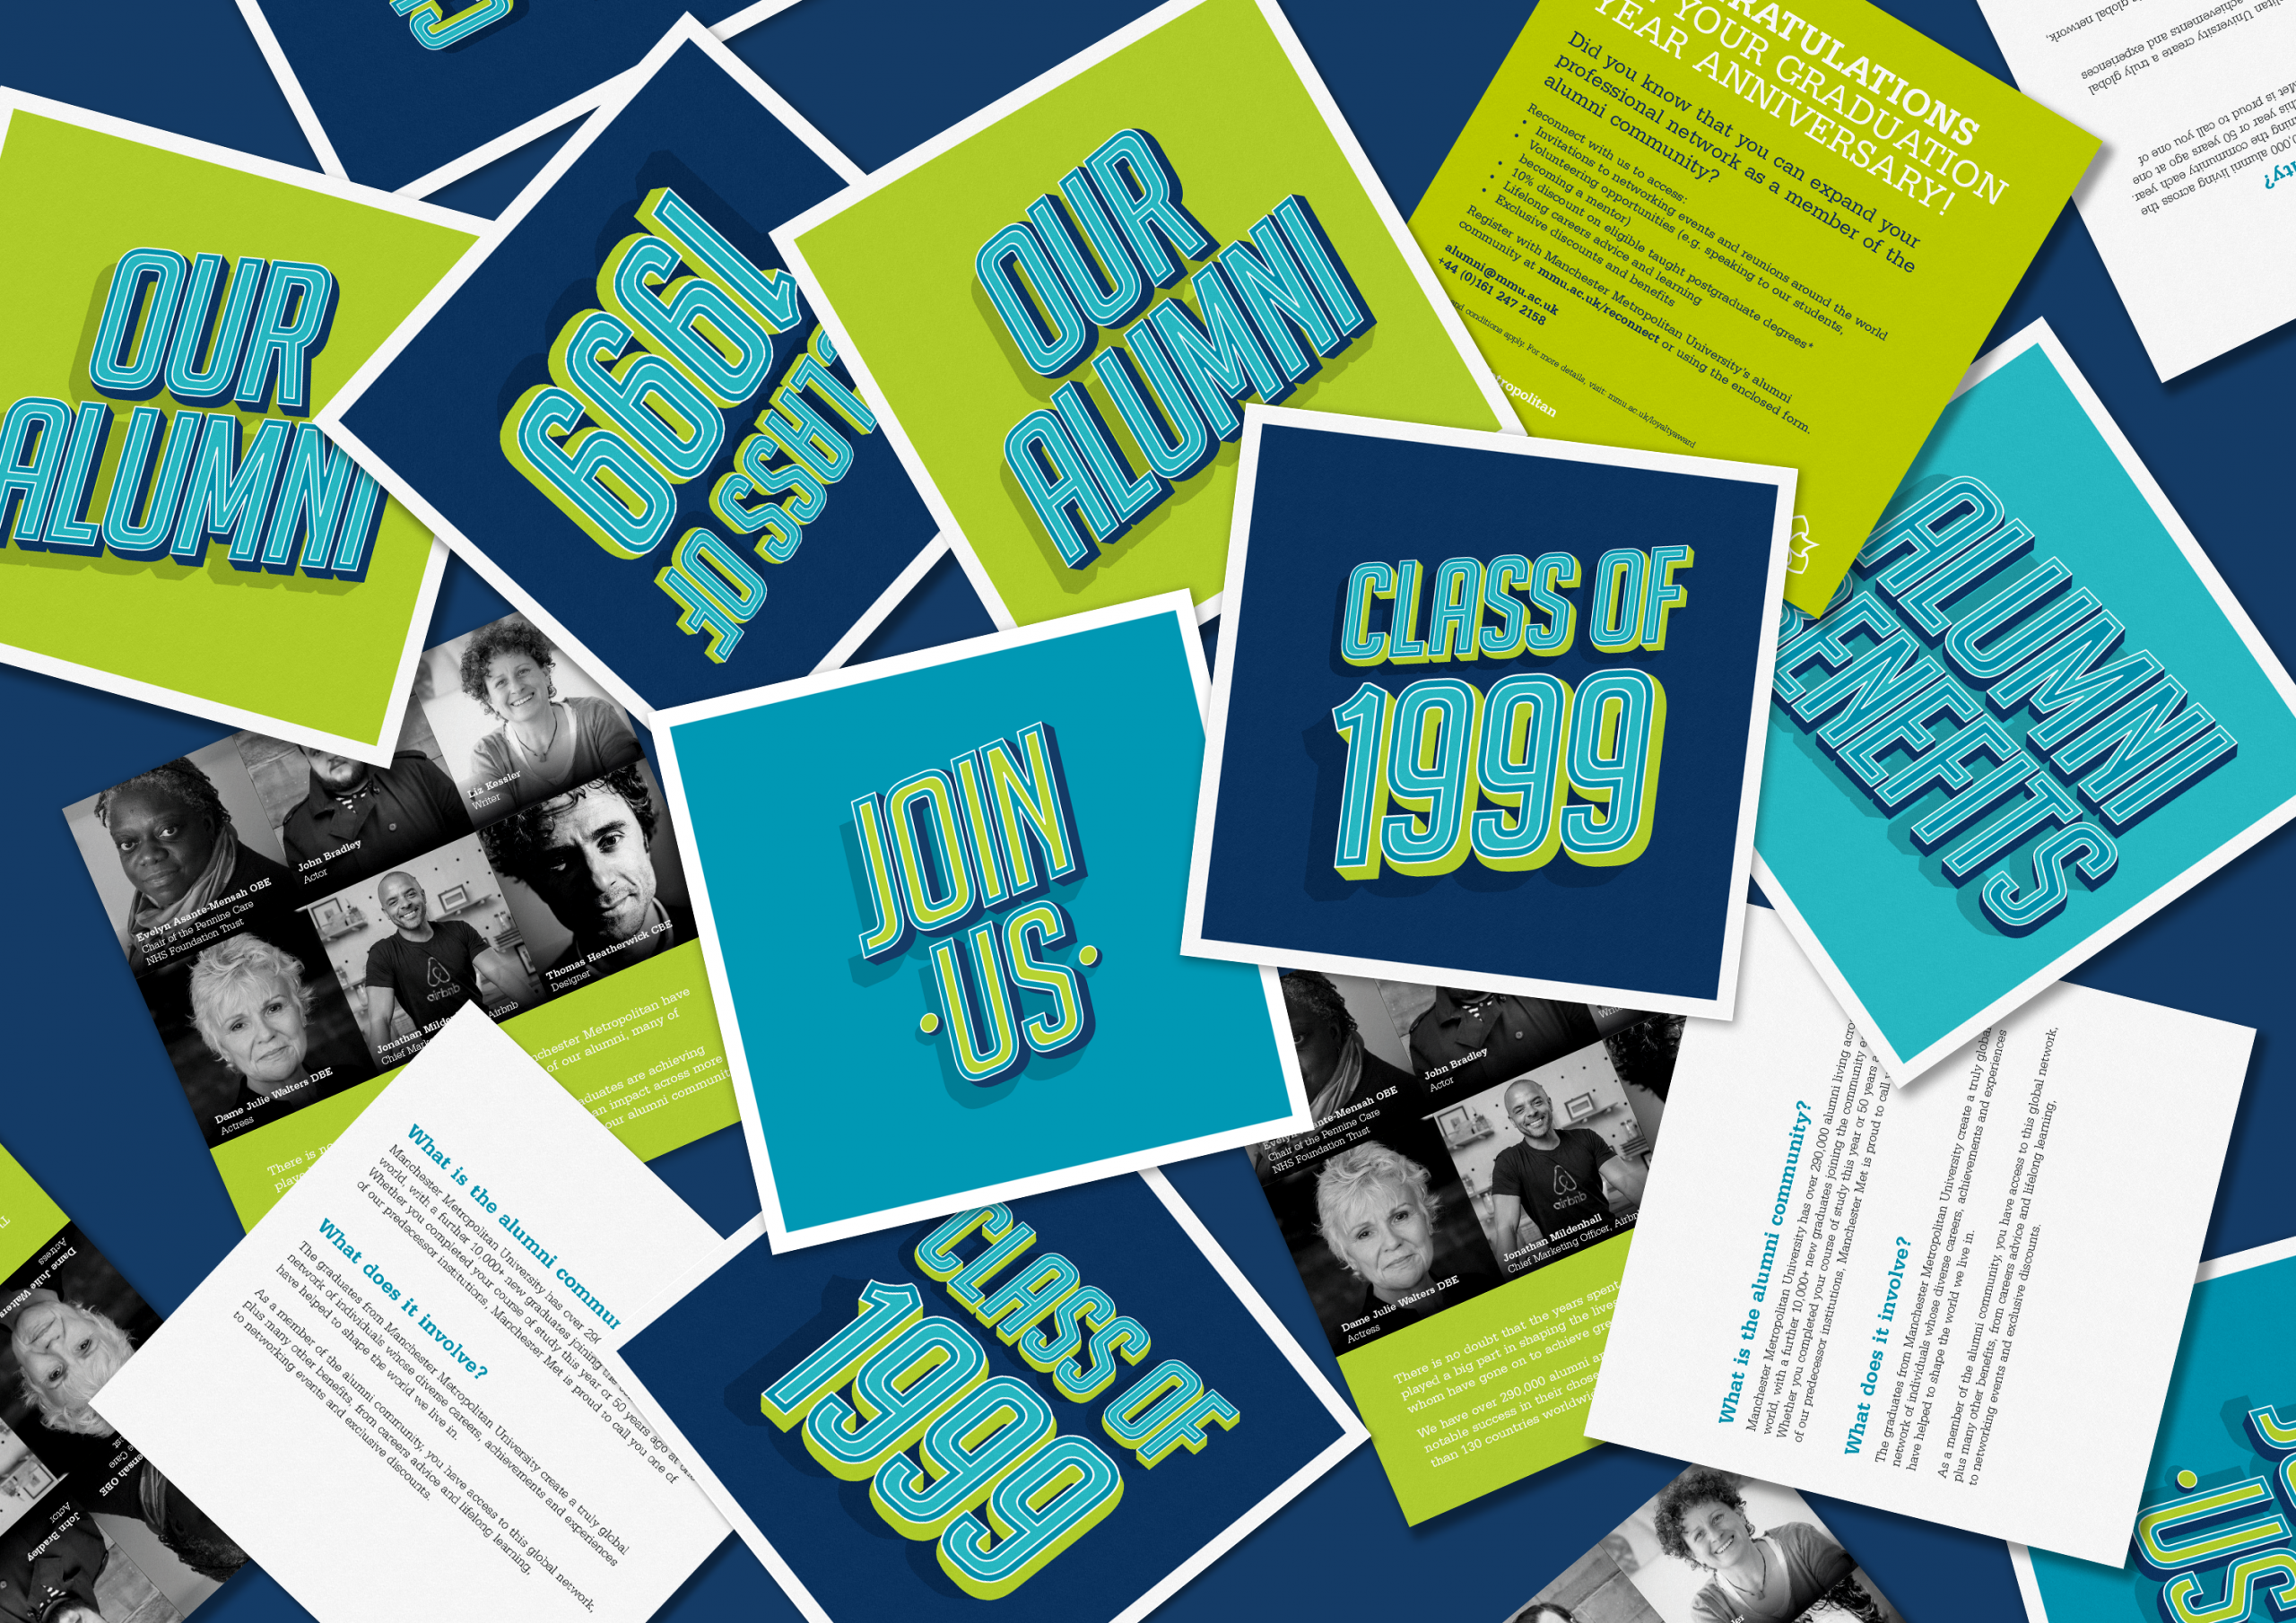 Lots of square, green, blue and navy leaflets scattered on surface, with 'Class of 199' and 'Our Alumni' text